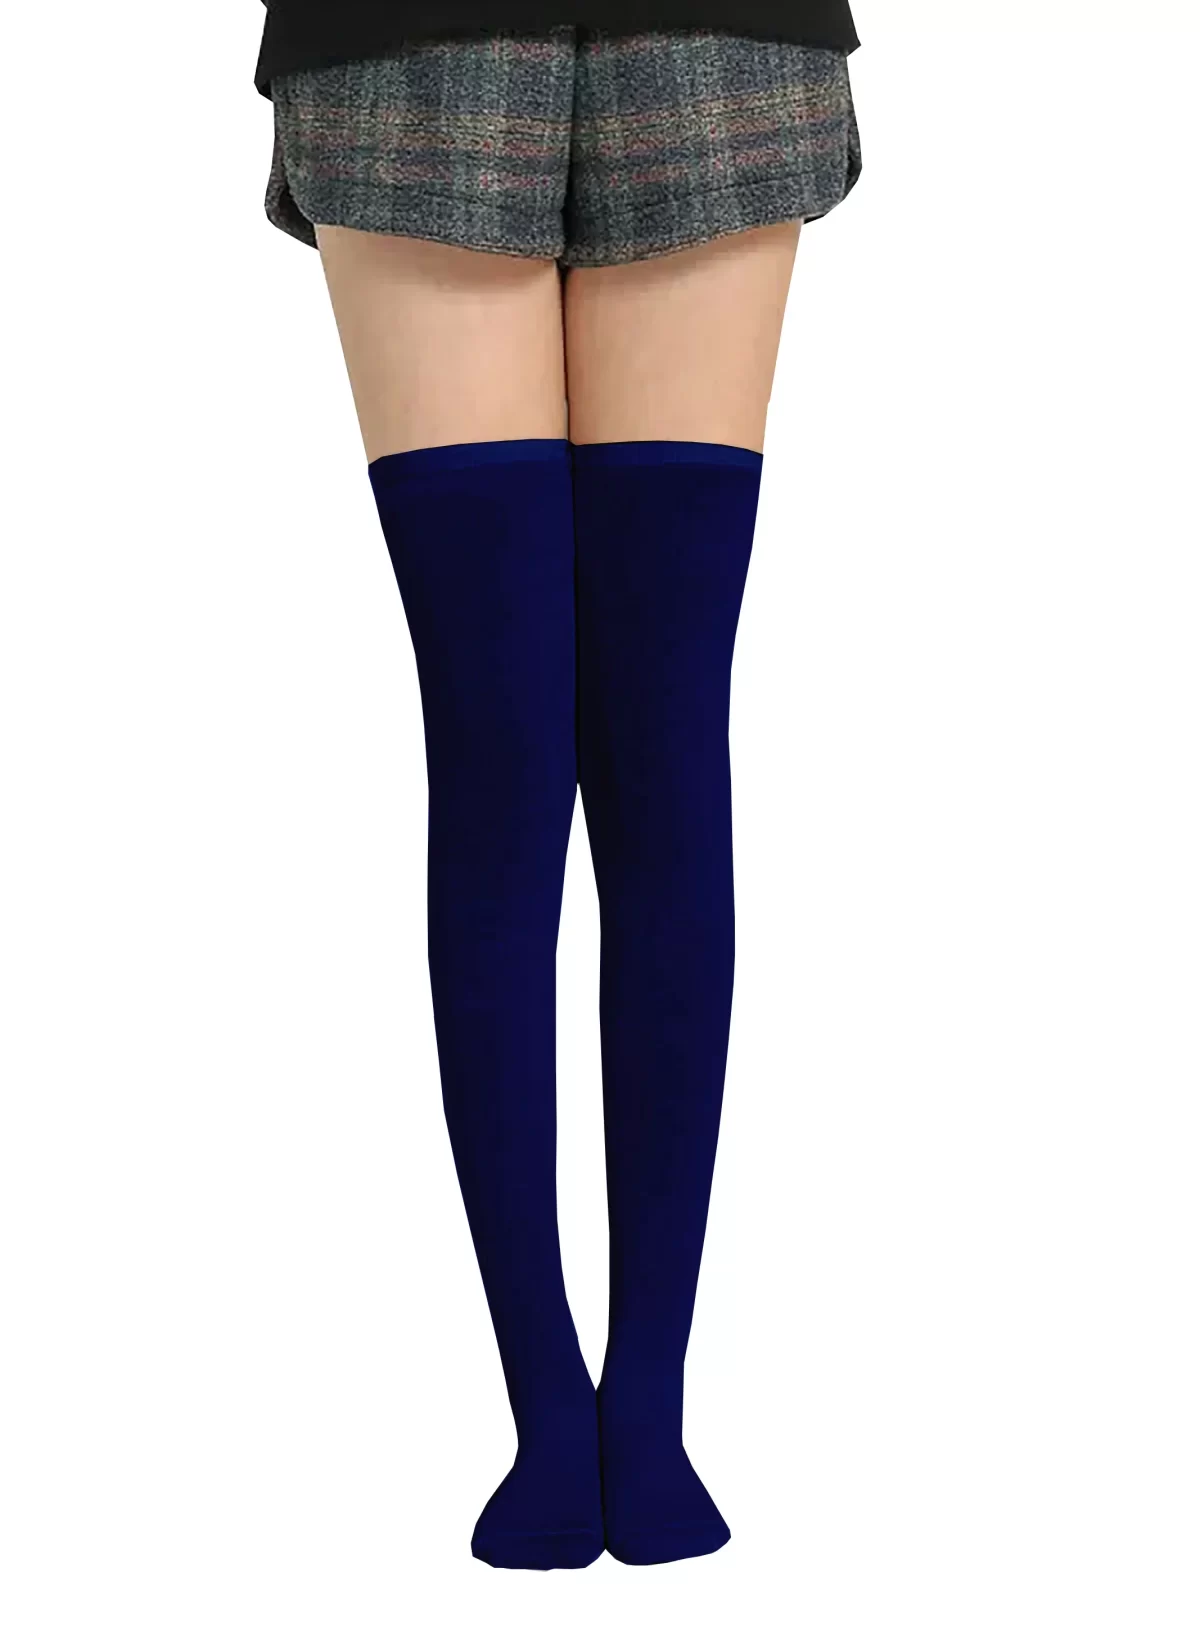 Navy Blue Girls and Women's Thigh High Socks ( Free Size )1